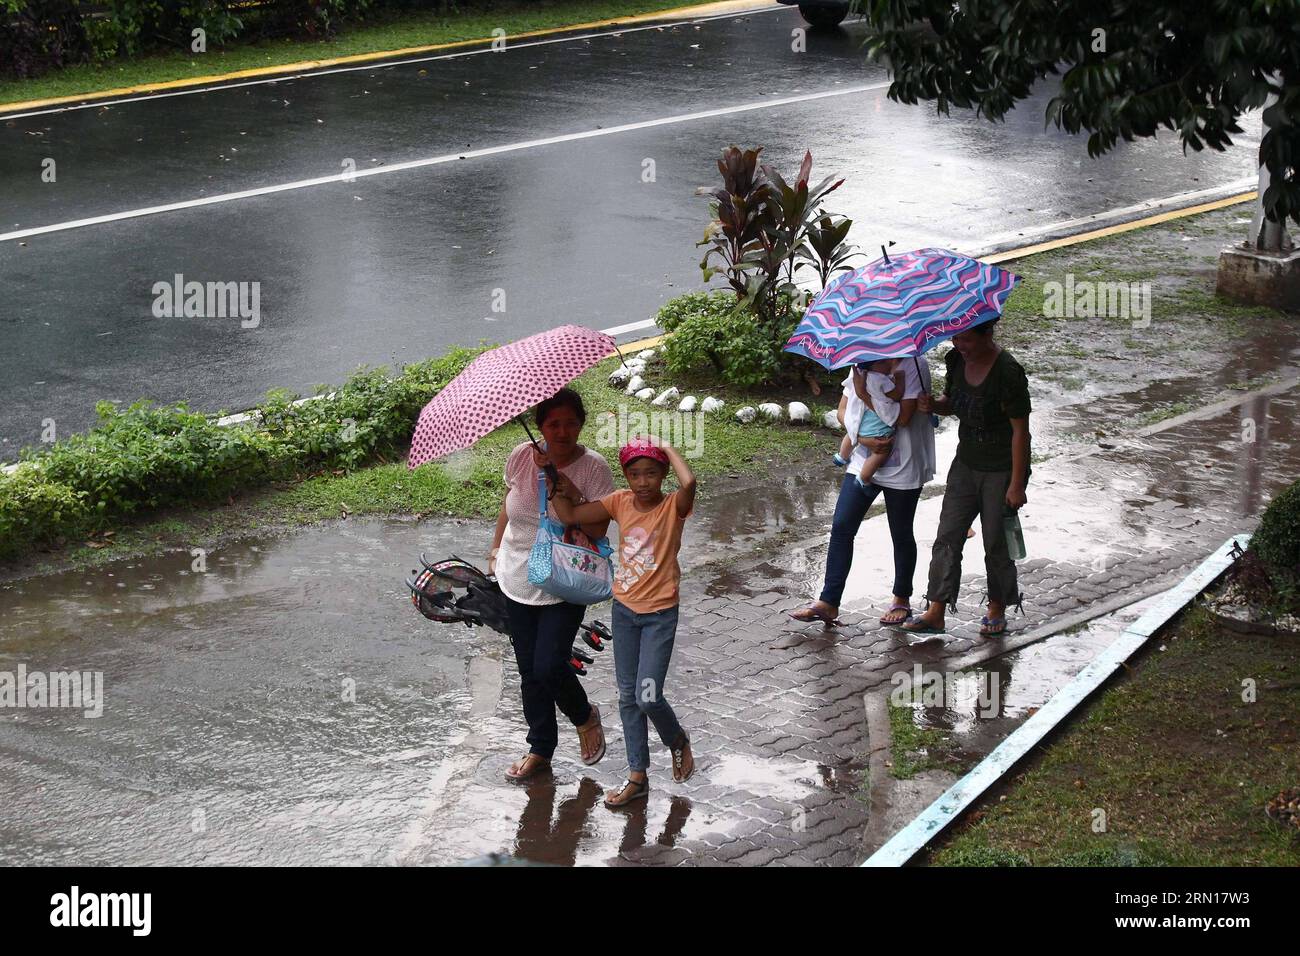 (141204) -- QUEZON CITY, Dec. 4, 2014 -- People walk with umbrellas in the rain in Quezon City, the Philippines, on Dec. 4, 2014. Typhoon Hagupit is packing maximum winds of 205 kph near the center and gustiness of up to 240 kph. The Philippine government will implement forced evacuation in areas that are expected to be hit by typhoon Hagupit (local name Ruby ), a senior government official said Thursday. ) PHILIPPINES-QUEZON CITY-TYPHOON-HAGUPIT RouellexUmali PUBLICATIONxNOTxINxCHN   Quezon City DEC 4 2014 Celebrities Walk With umbrellas in The Rain in Quezon City The Philippines ON DEC 4 201 Stock Photo